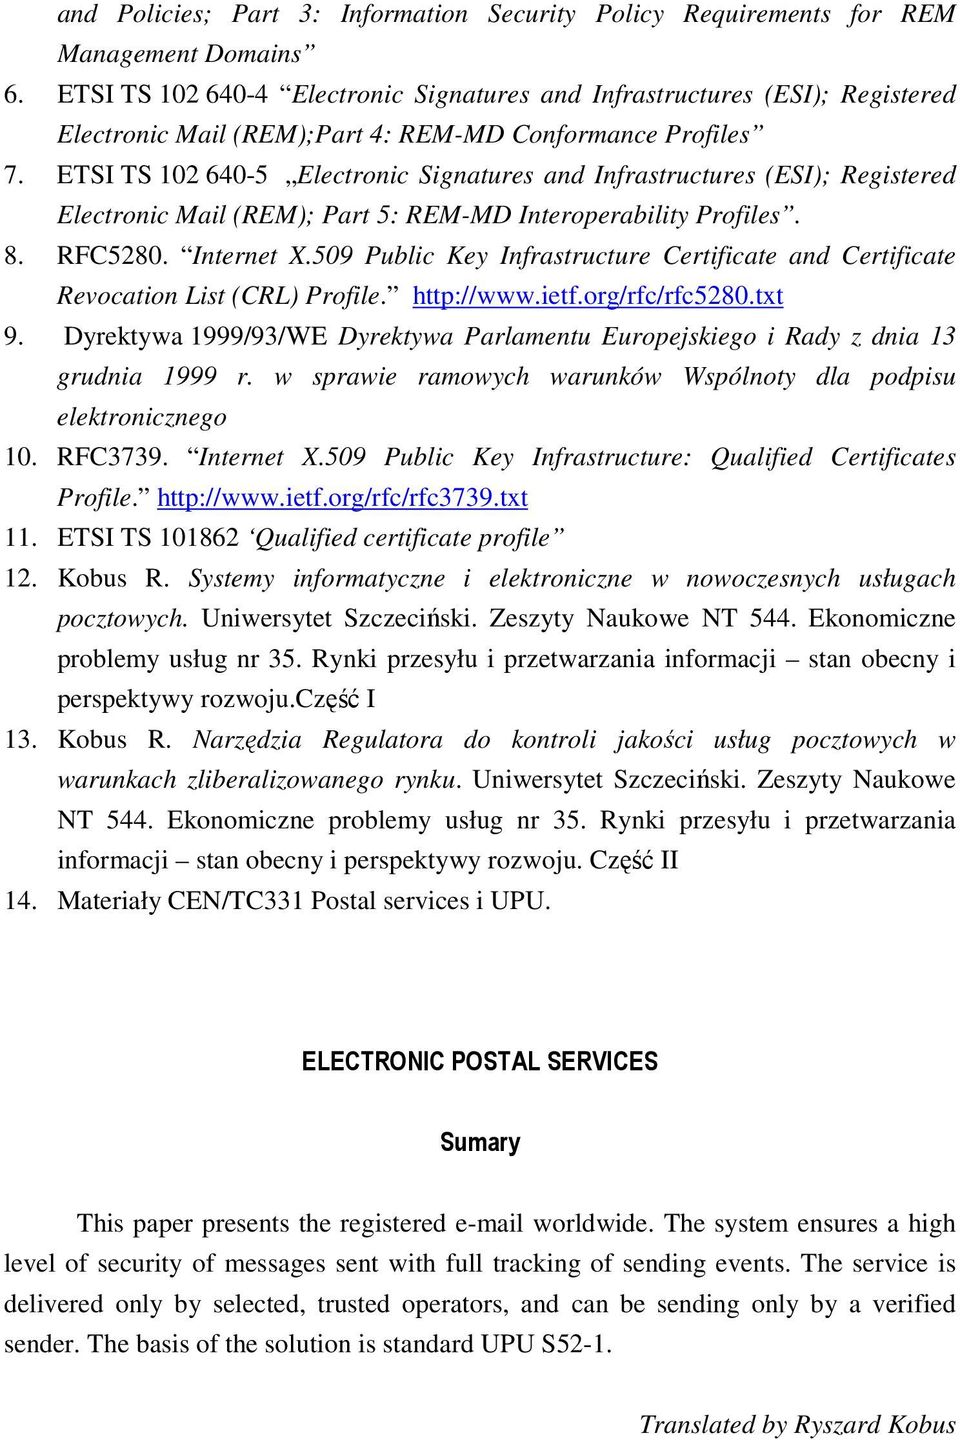 ETSI TS 102 640-5 Electronic Signatures and Infrastructures (ESI); Registered Electronic Mail (REM); Part 5: REM-MD Interoperability Profiles. 8. RFC5280. Internet X.